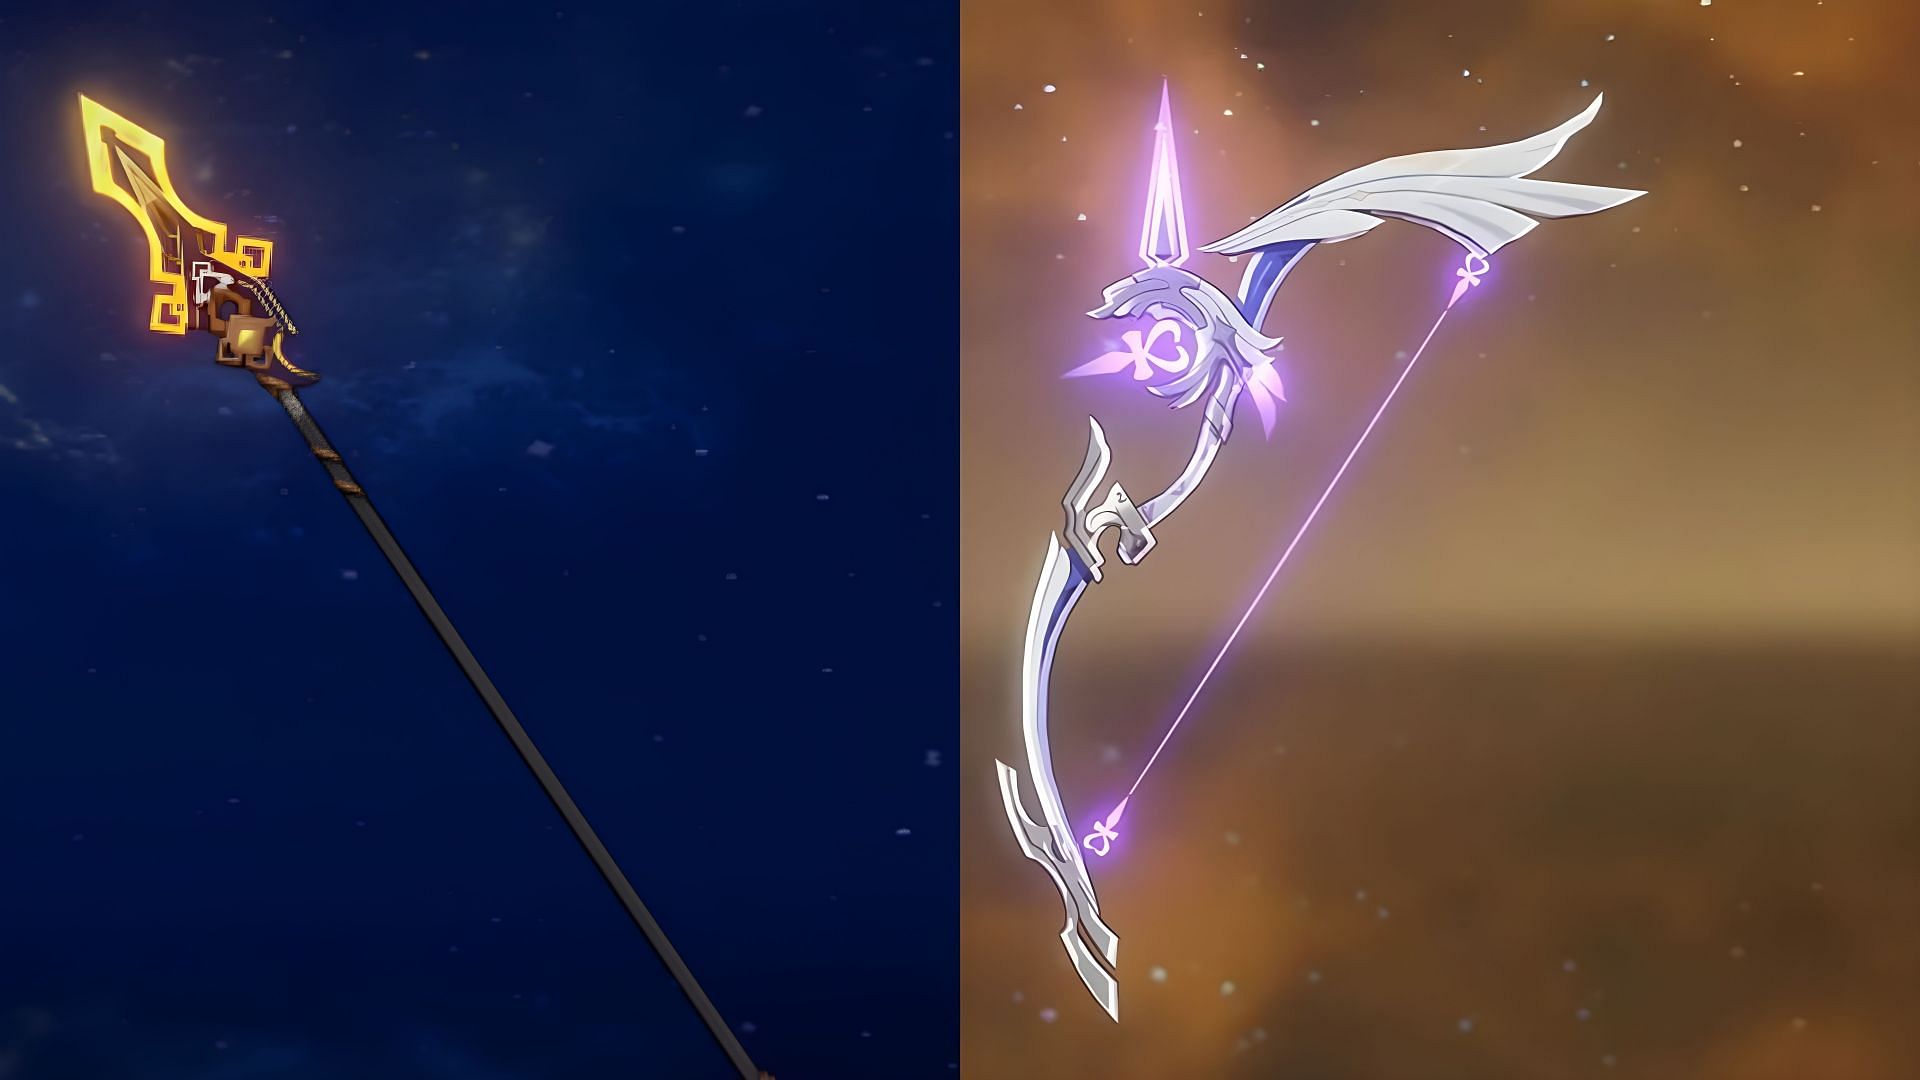 The Vortex Vanquisher and the Amos Bow may be returning (Image via Genshin Impact)